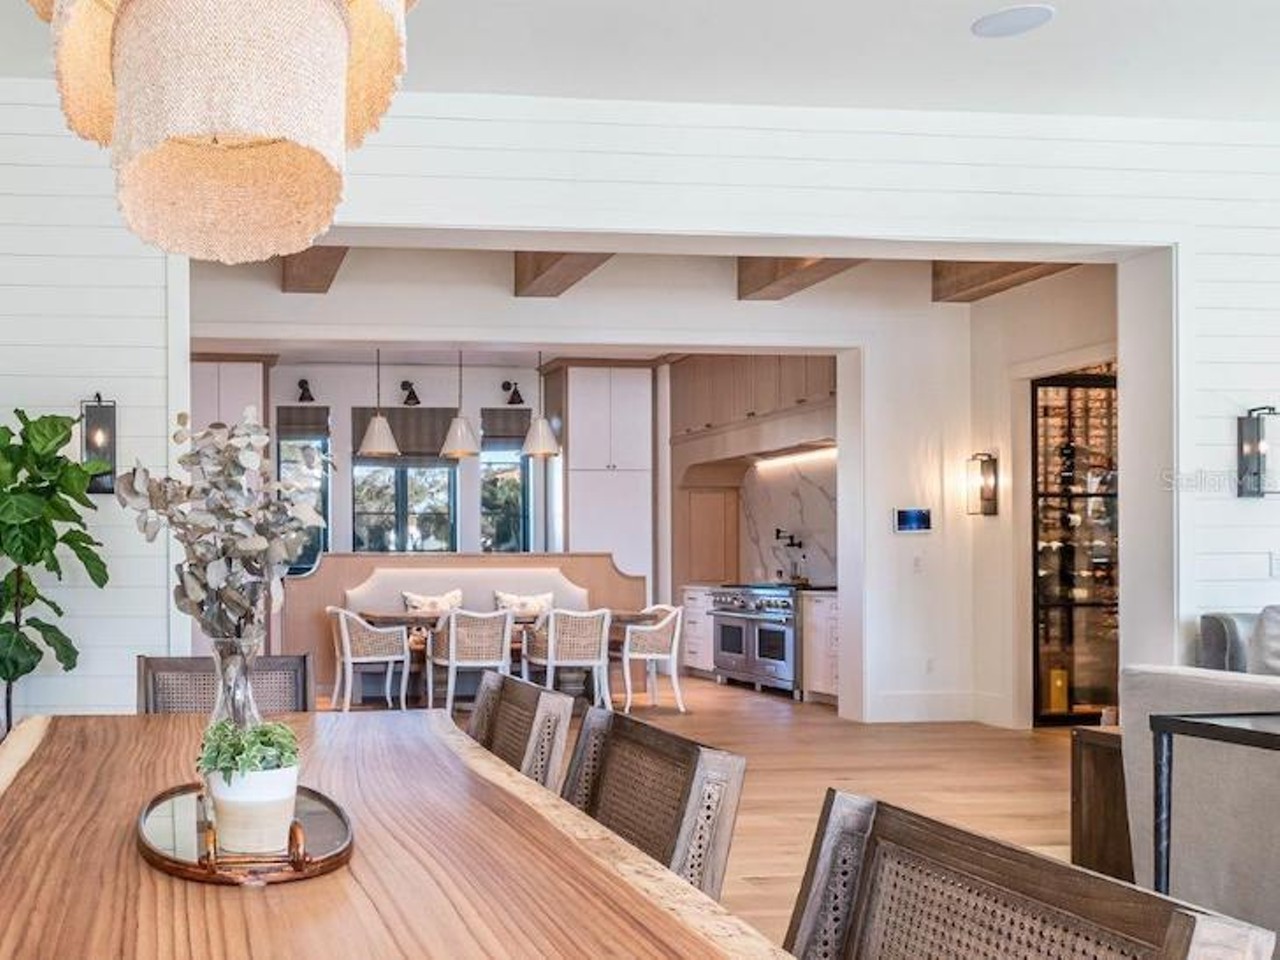 Armature Works developer 'Chas' Bruck is selling his Davis Islands home for $11 million